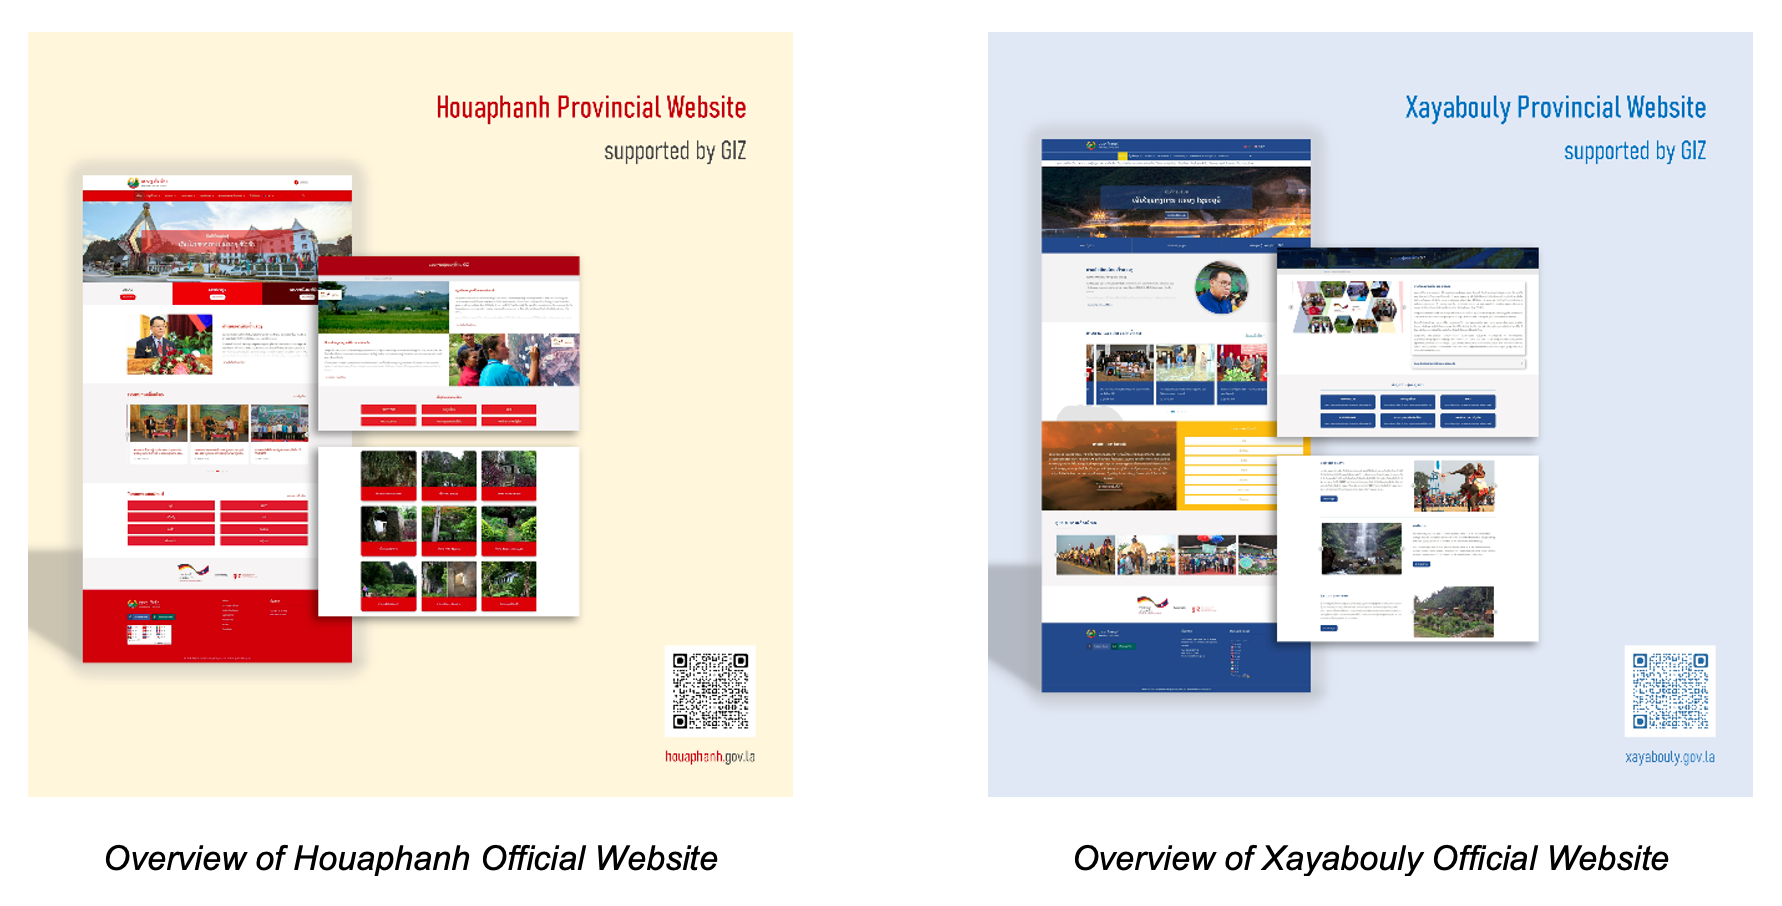 Two provinces in Laos launched their first official websites with the support from GIZ